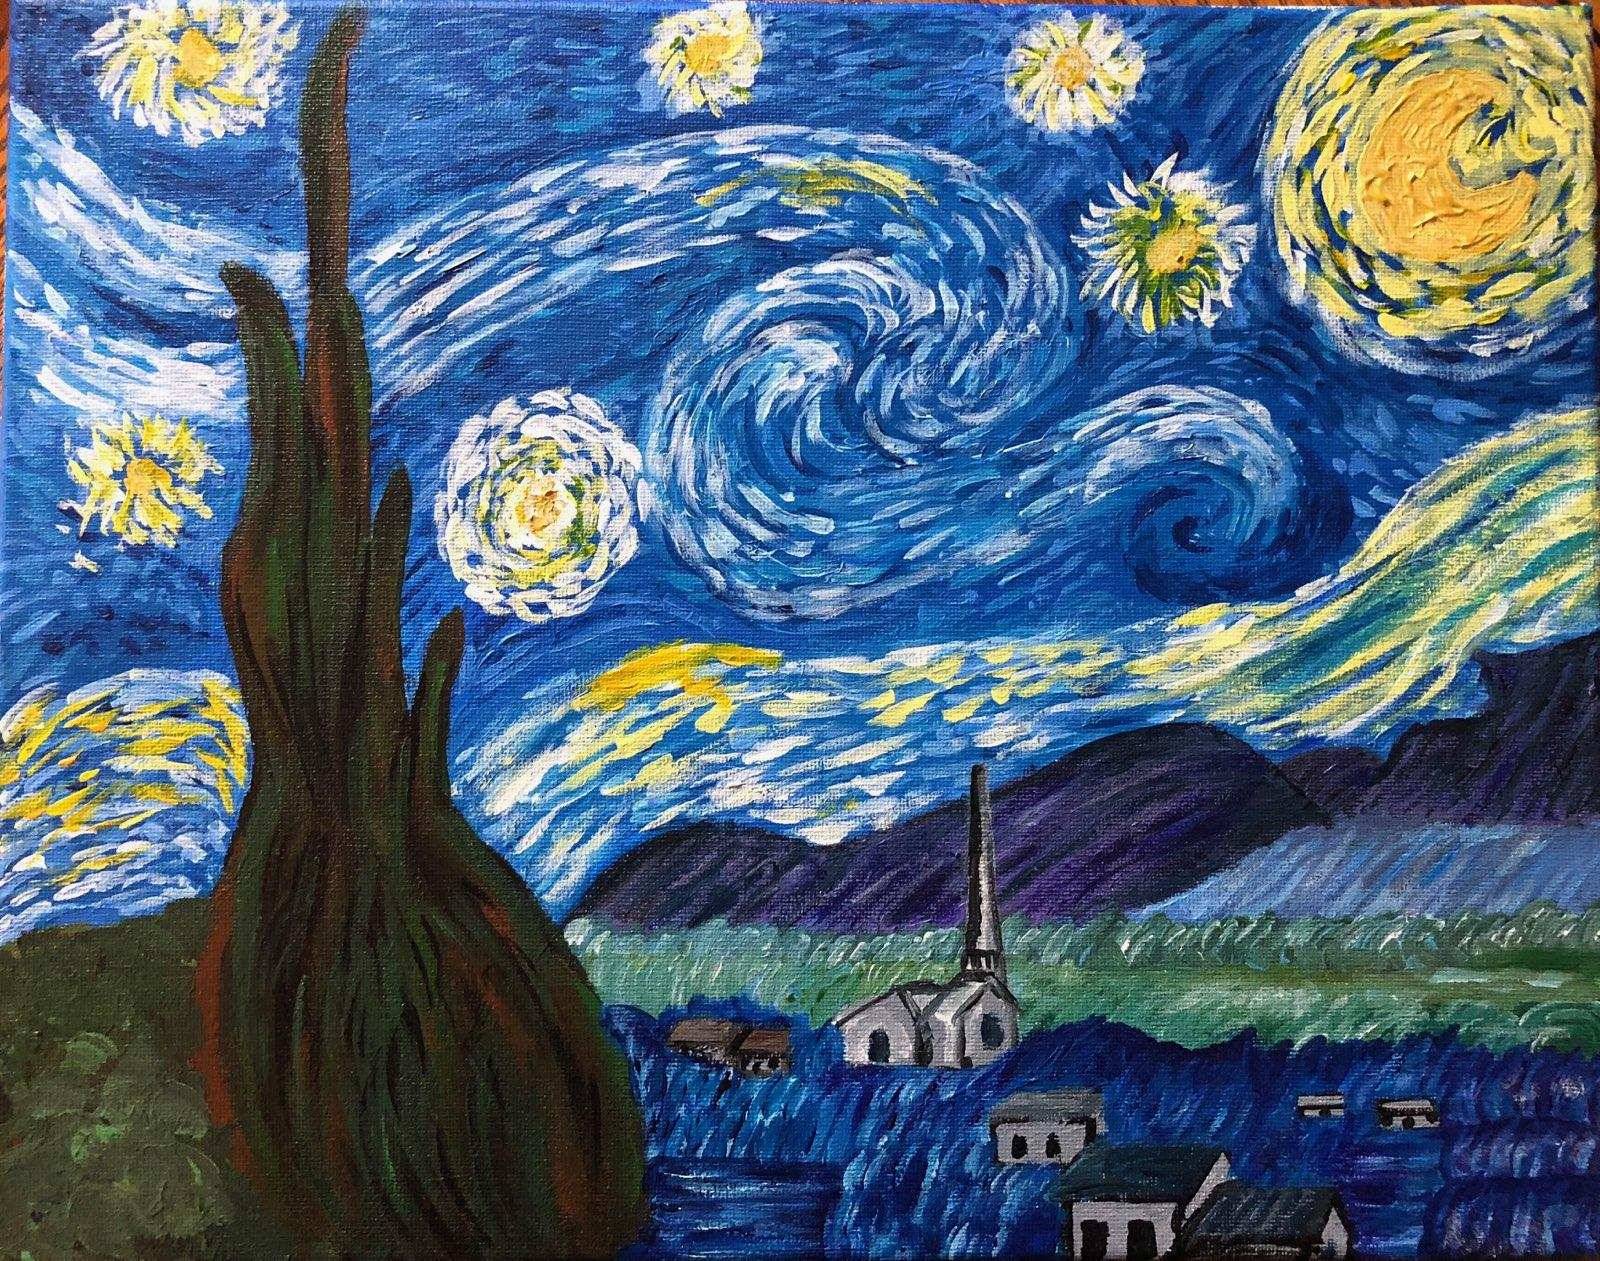 Rendition of Van Gogh's Starry Night by Mary